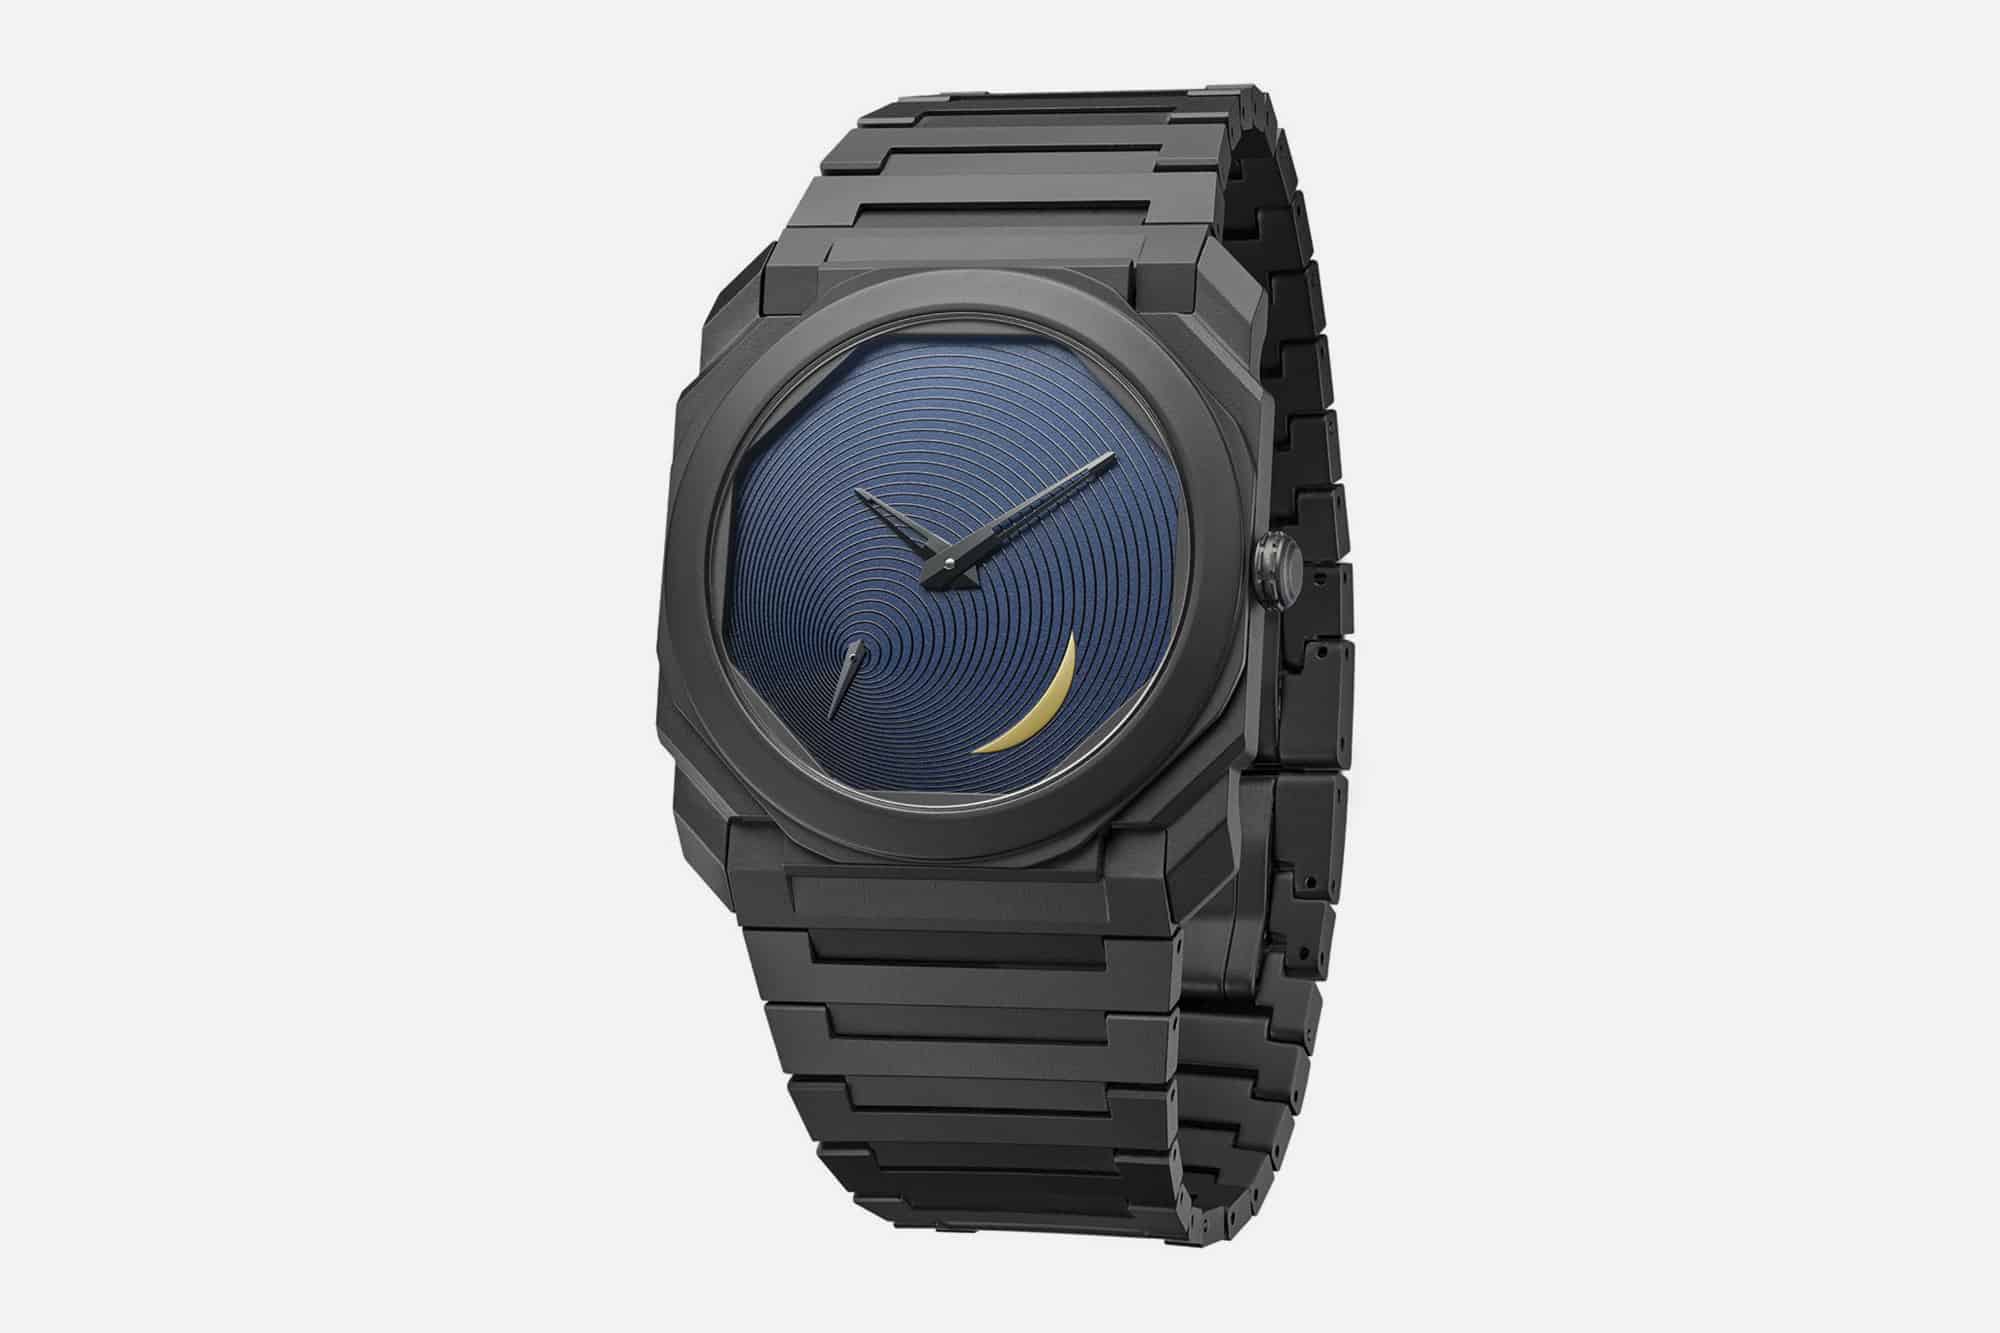 Introducing the Absolutely Striking Bulgari Octo Finissimo Tadao Ando Limited Edition